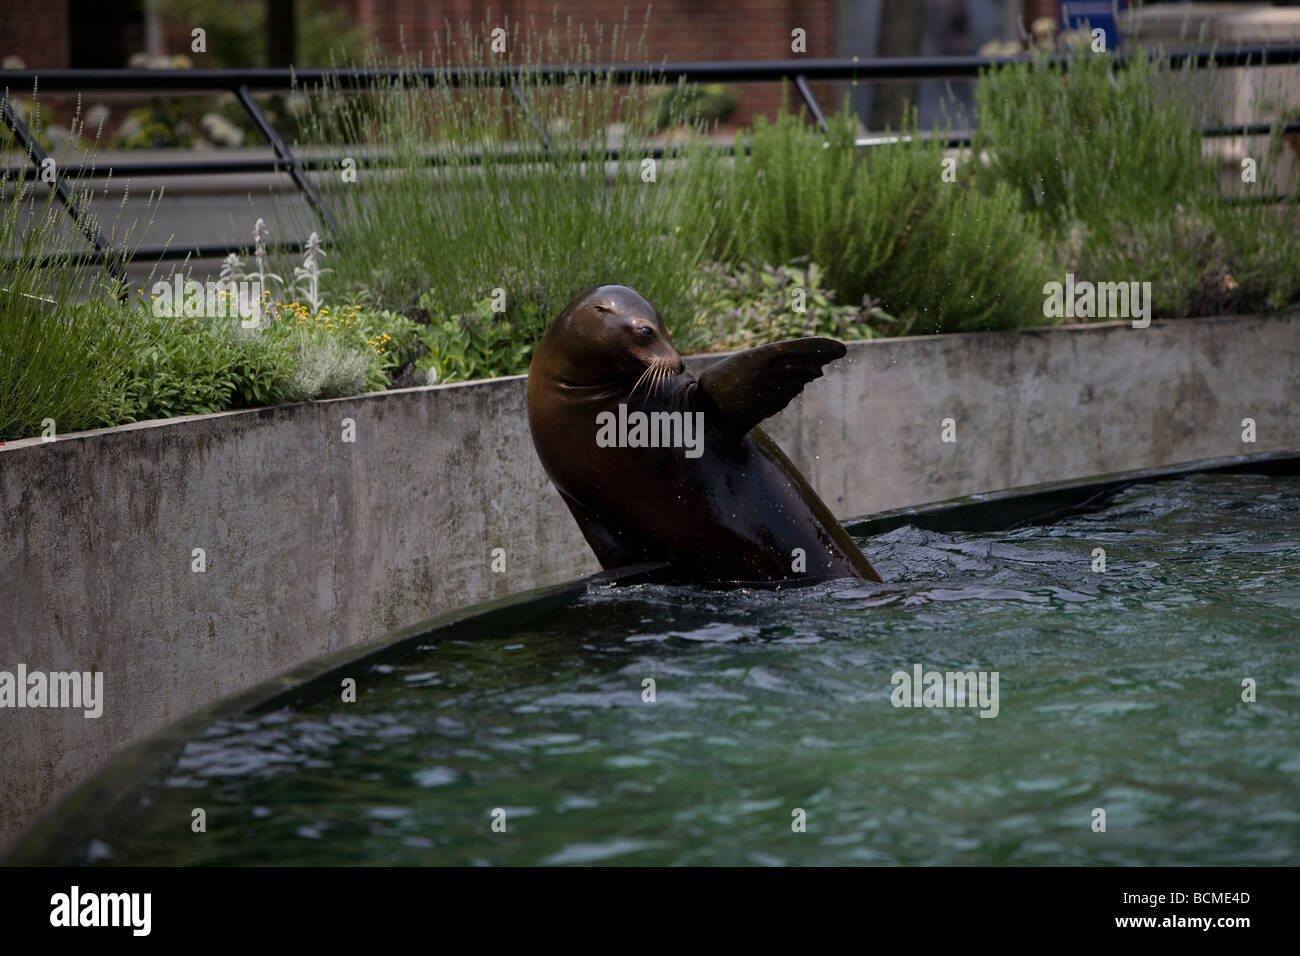 Trained sea lion performing for the crowd in Prospect park Zoo ...